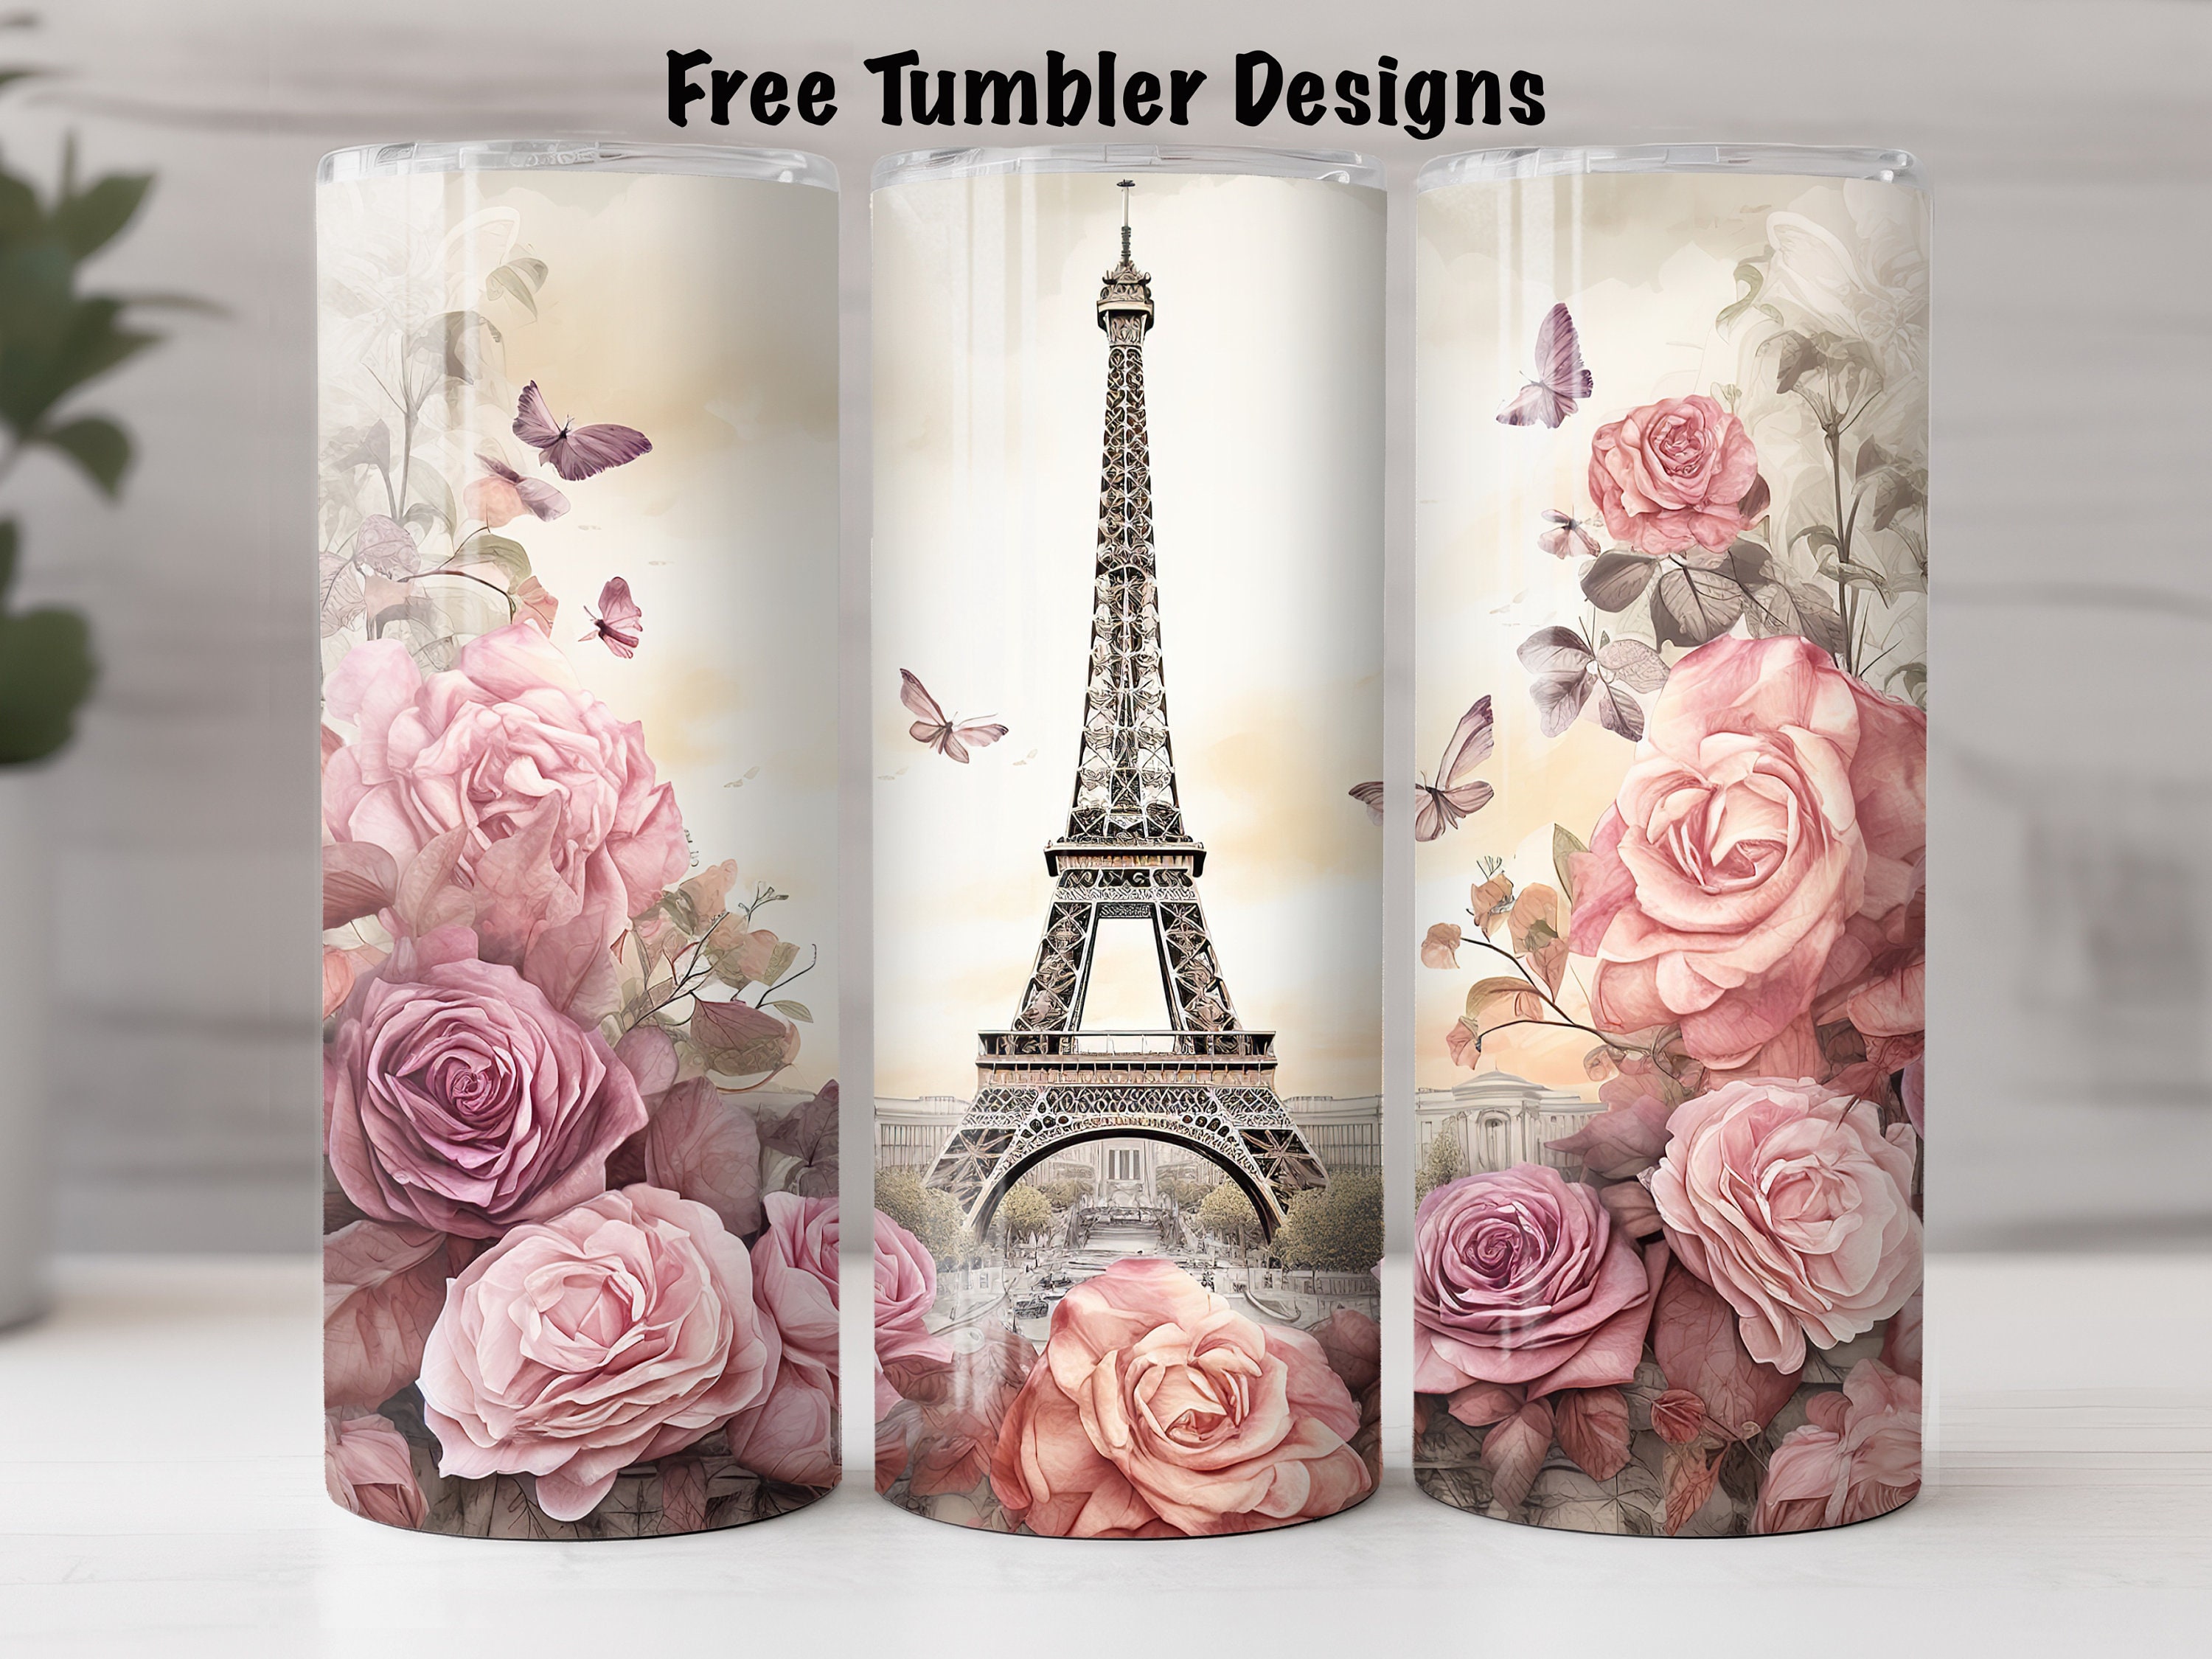 Romantic, dramatic flower arrangements - lots of roses in Eiffel tower  vases spray painted mat…